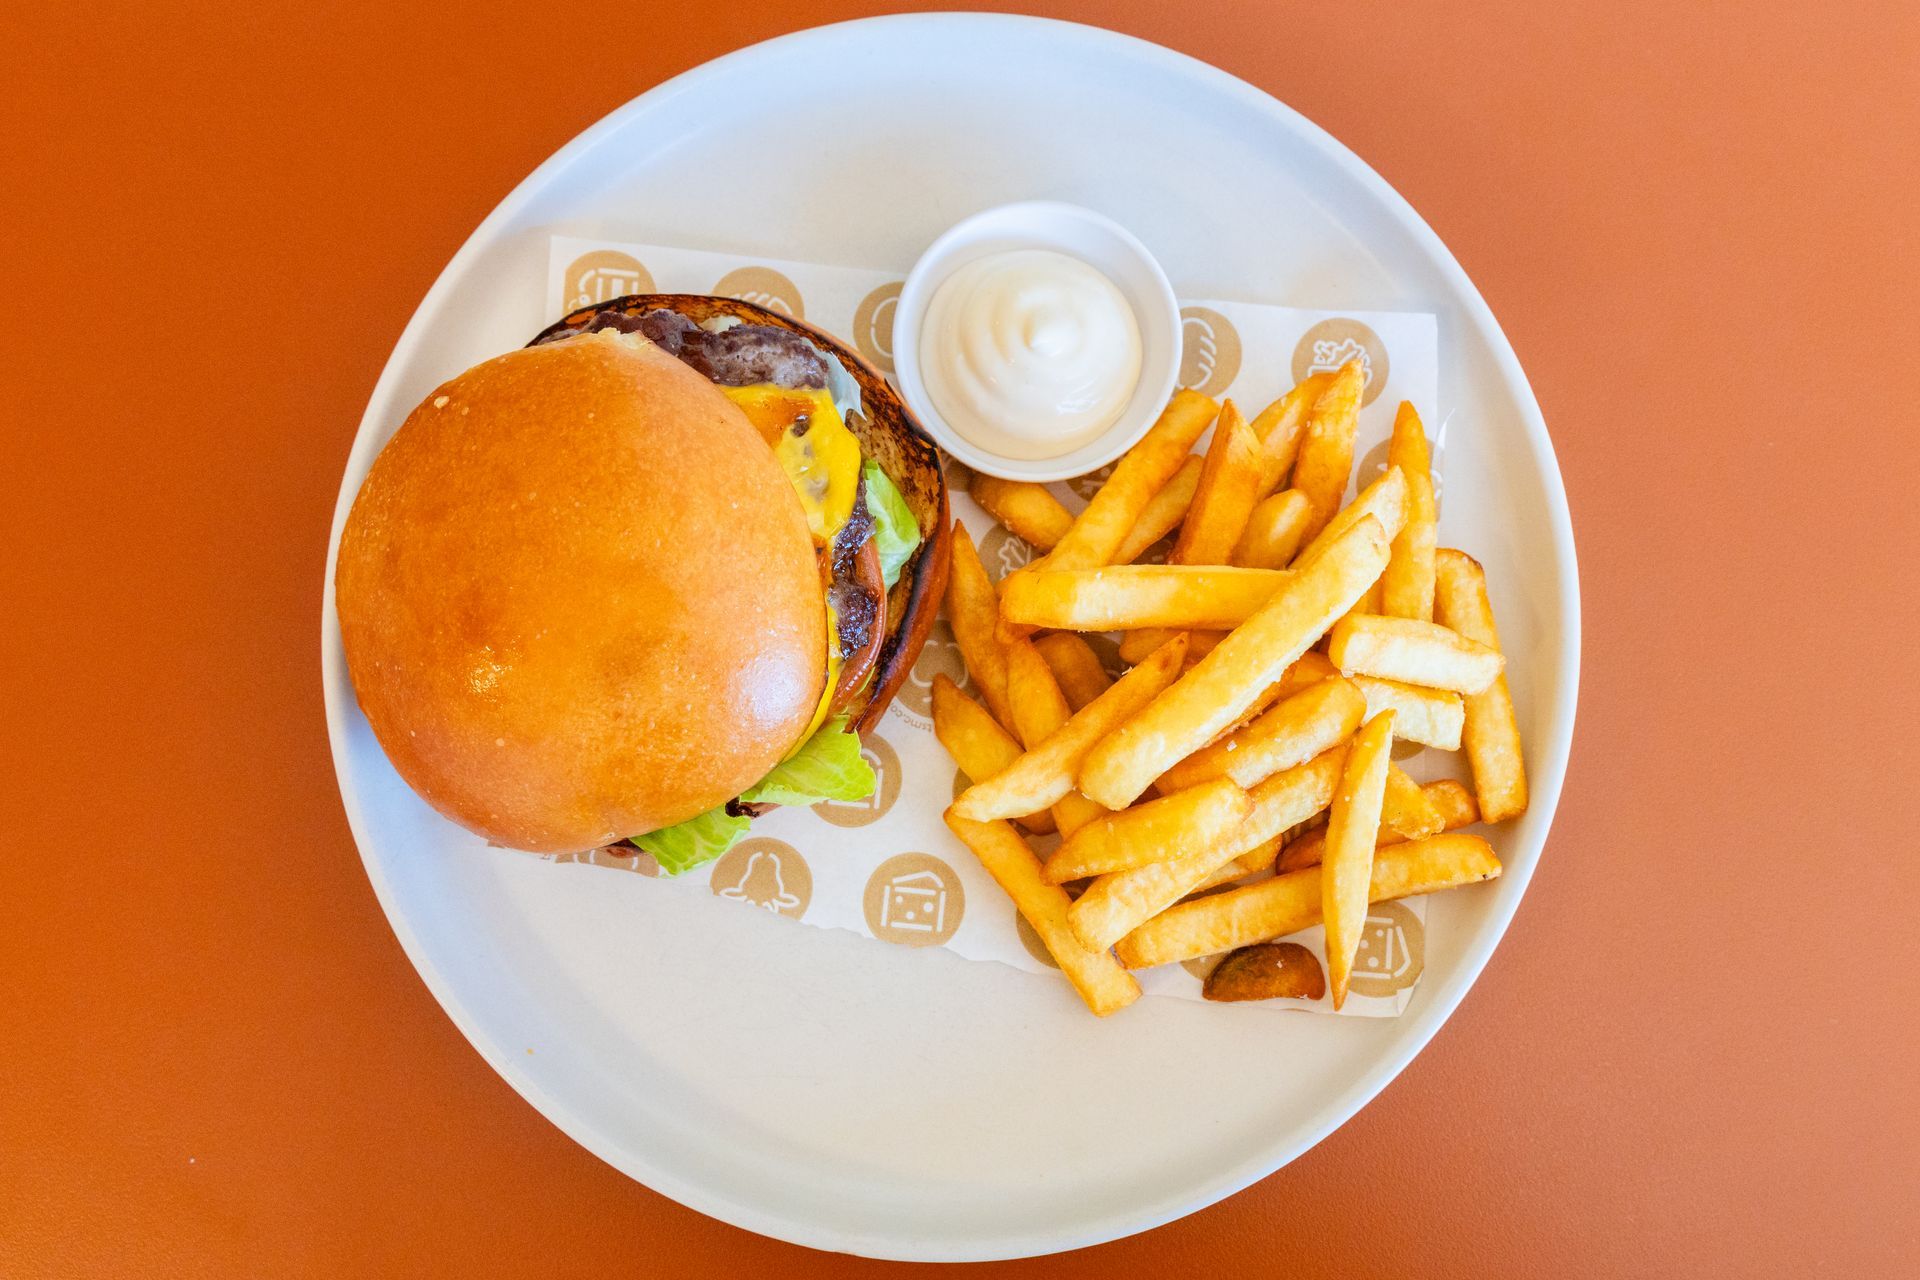 Beef Burger — Cafe, Bar and Catering Services in Southport, QLD